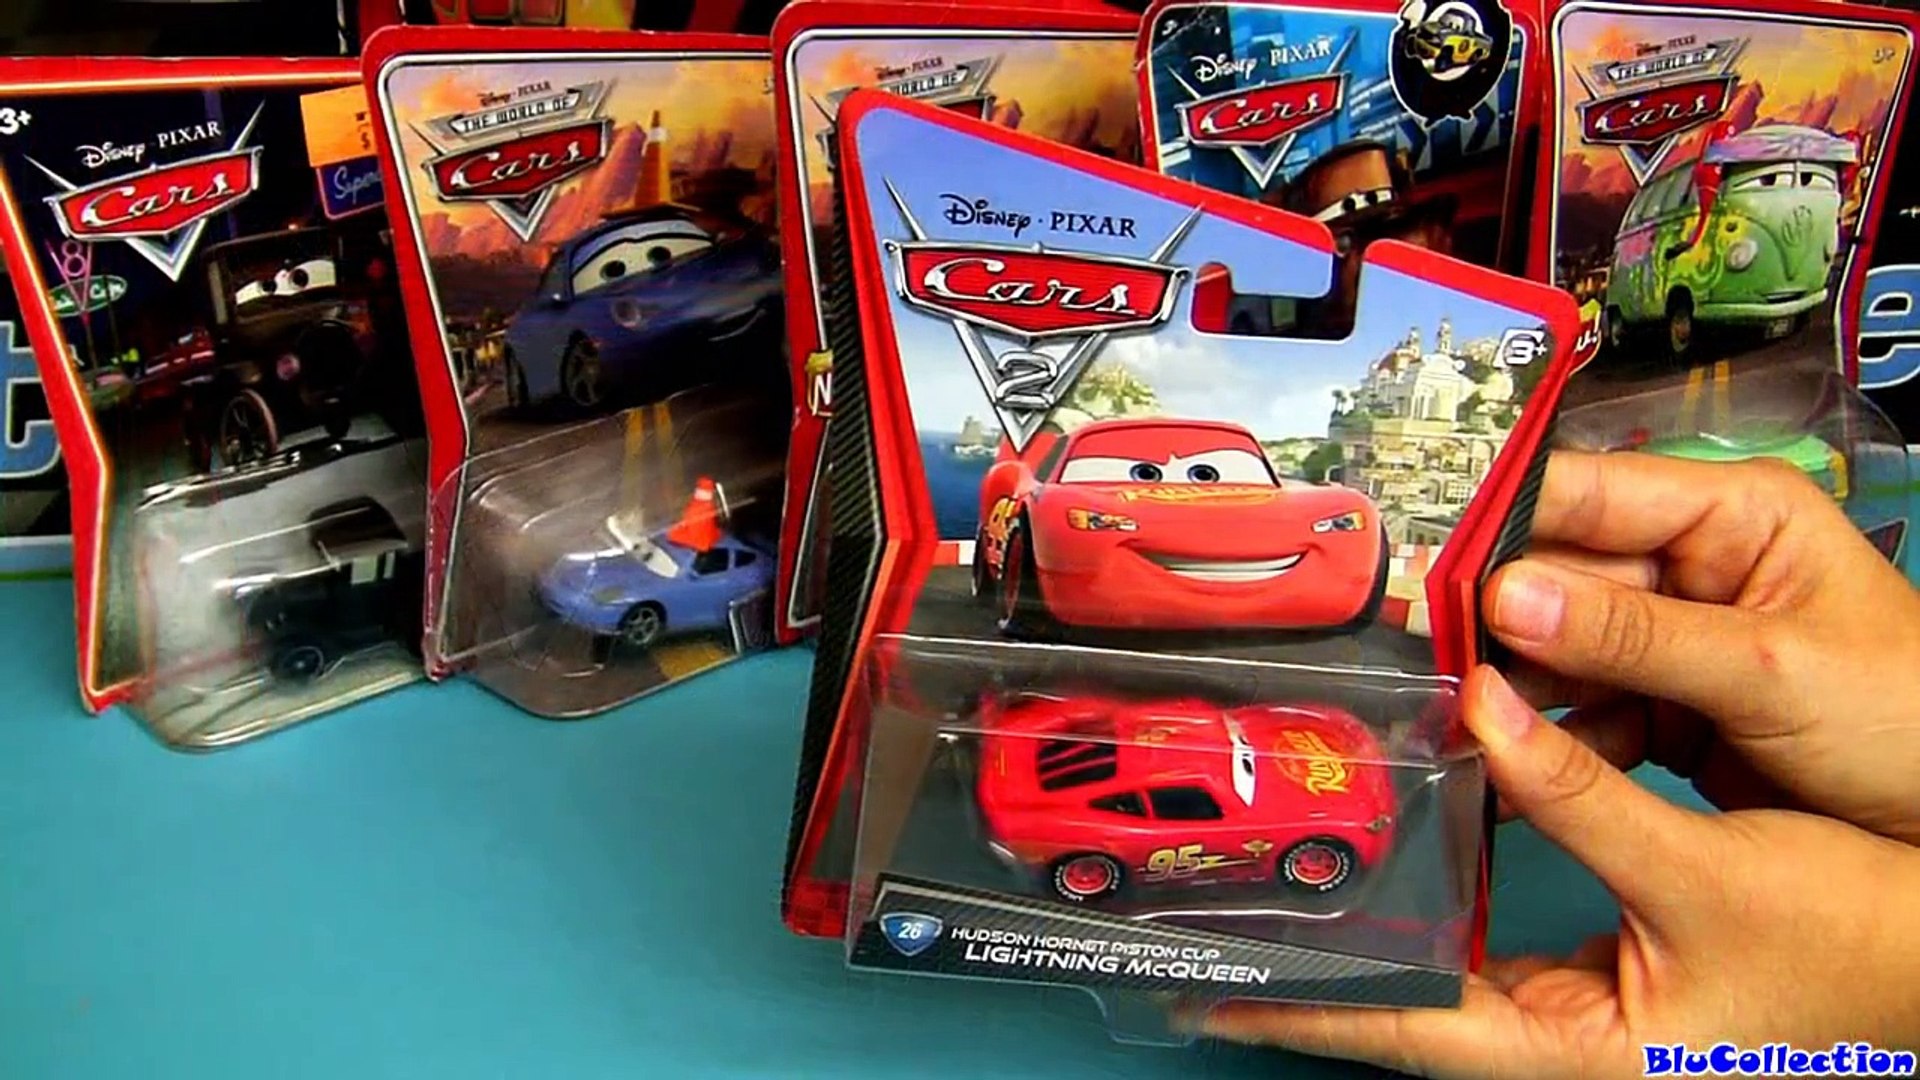 Hudson Hornet Piston Cup Lightning Mcqueen #26 Diecast CARS 2 Disney toy  review by Blucollection - Dailymotion Video